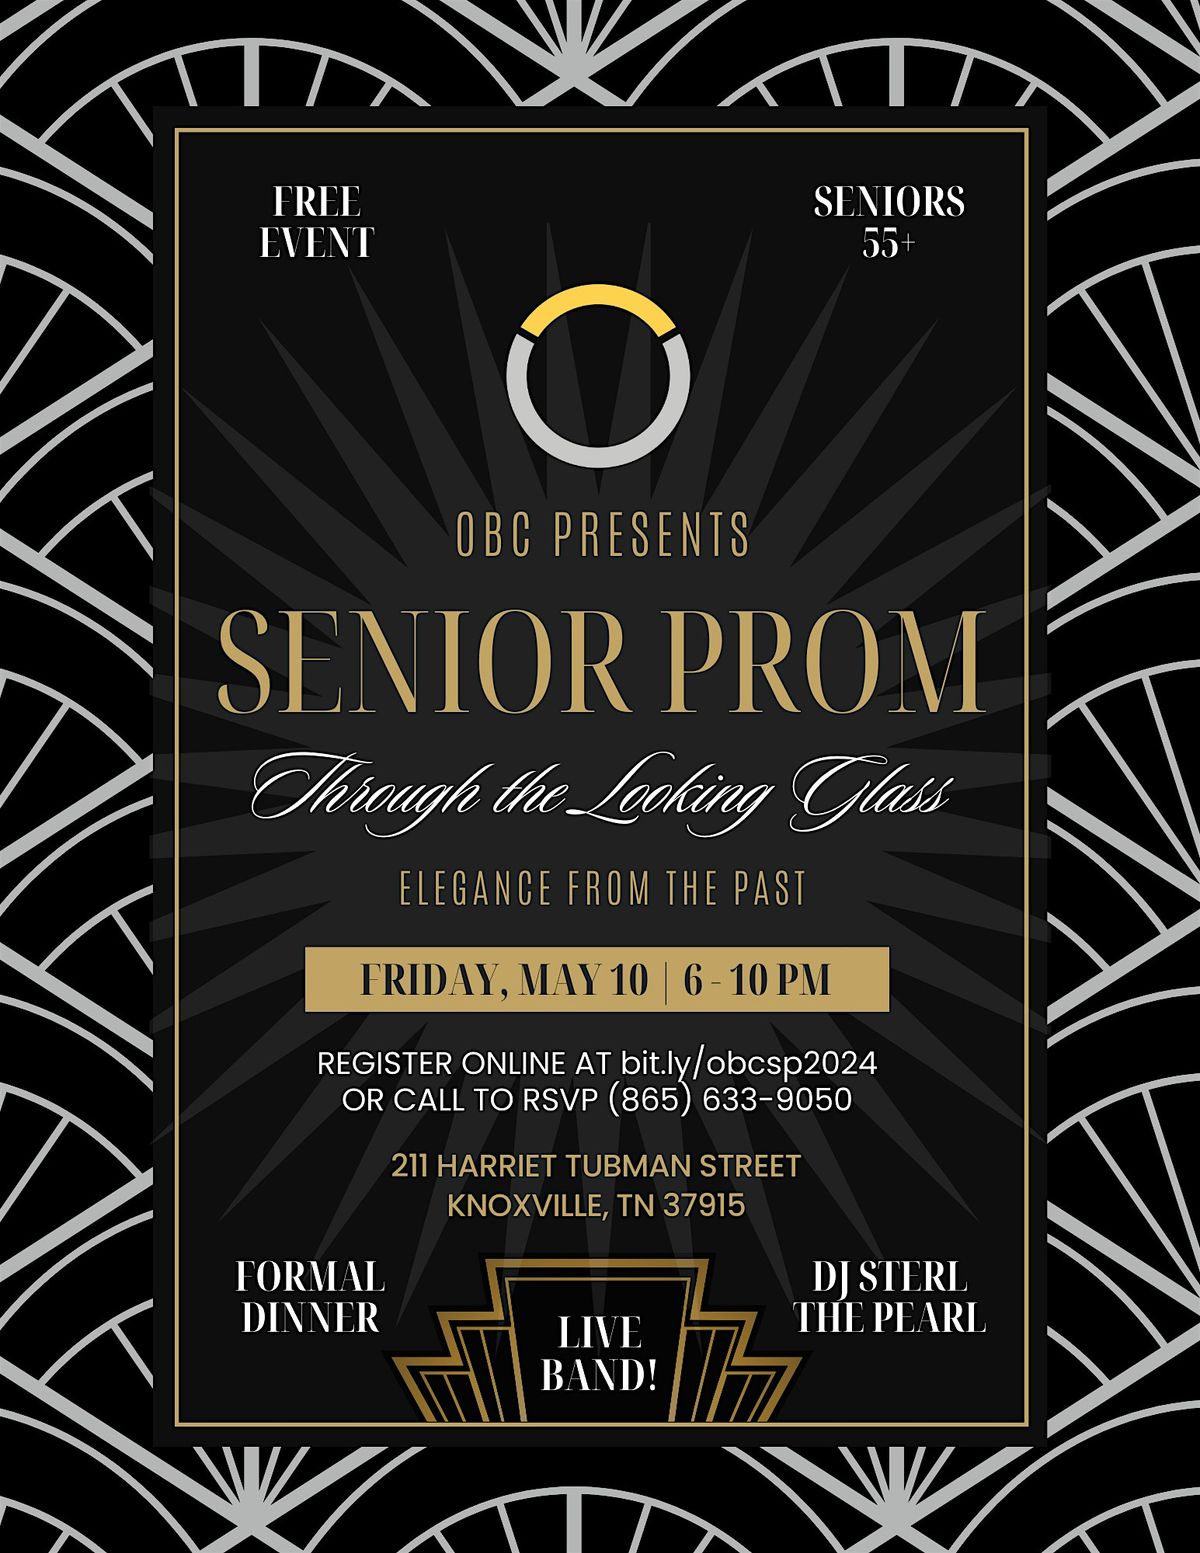 OBC Senior Prom: Through the Looking Glass